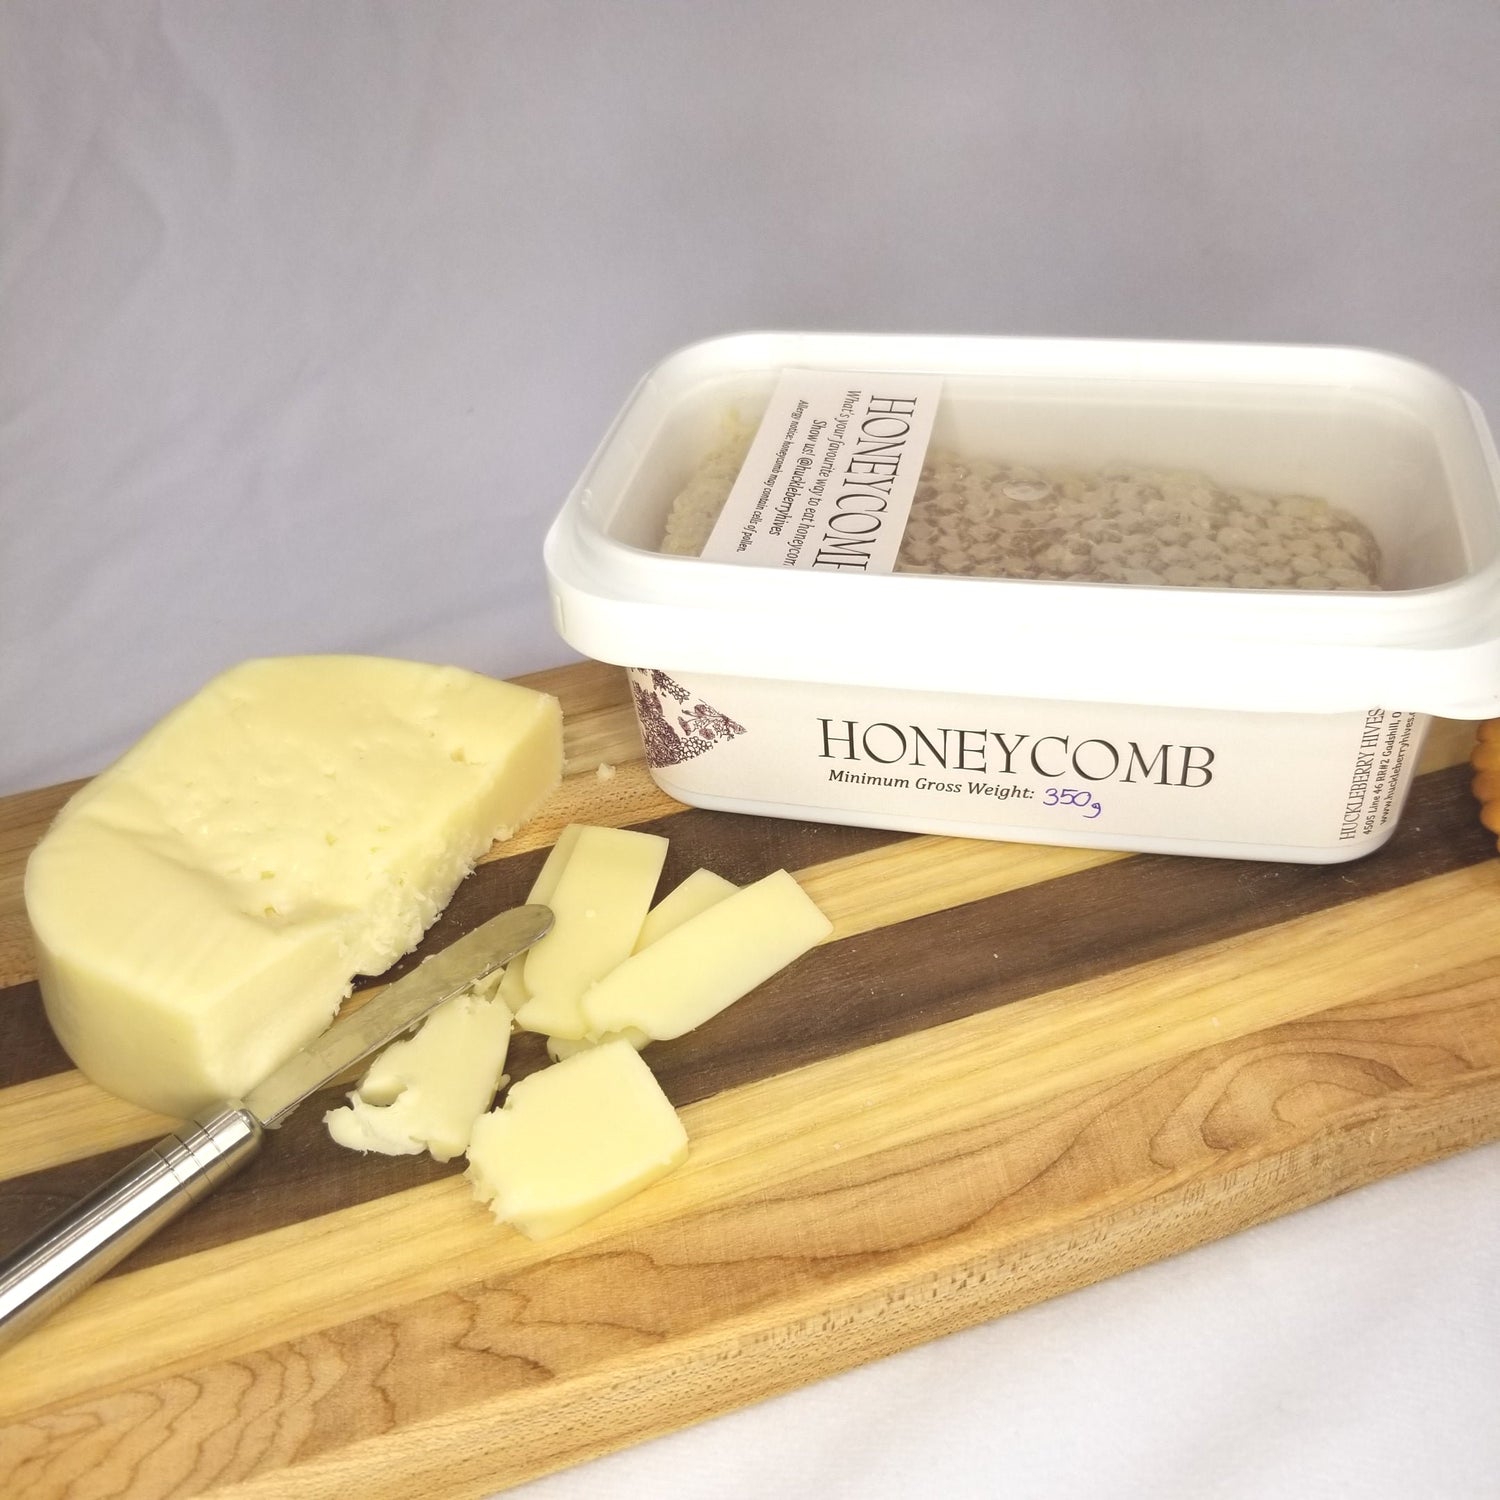 Packaged honeycomb sits beside cheese on a wooden charcuterie board.